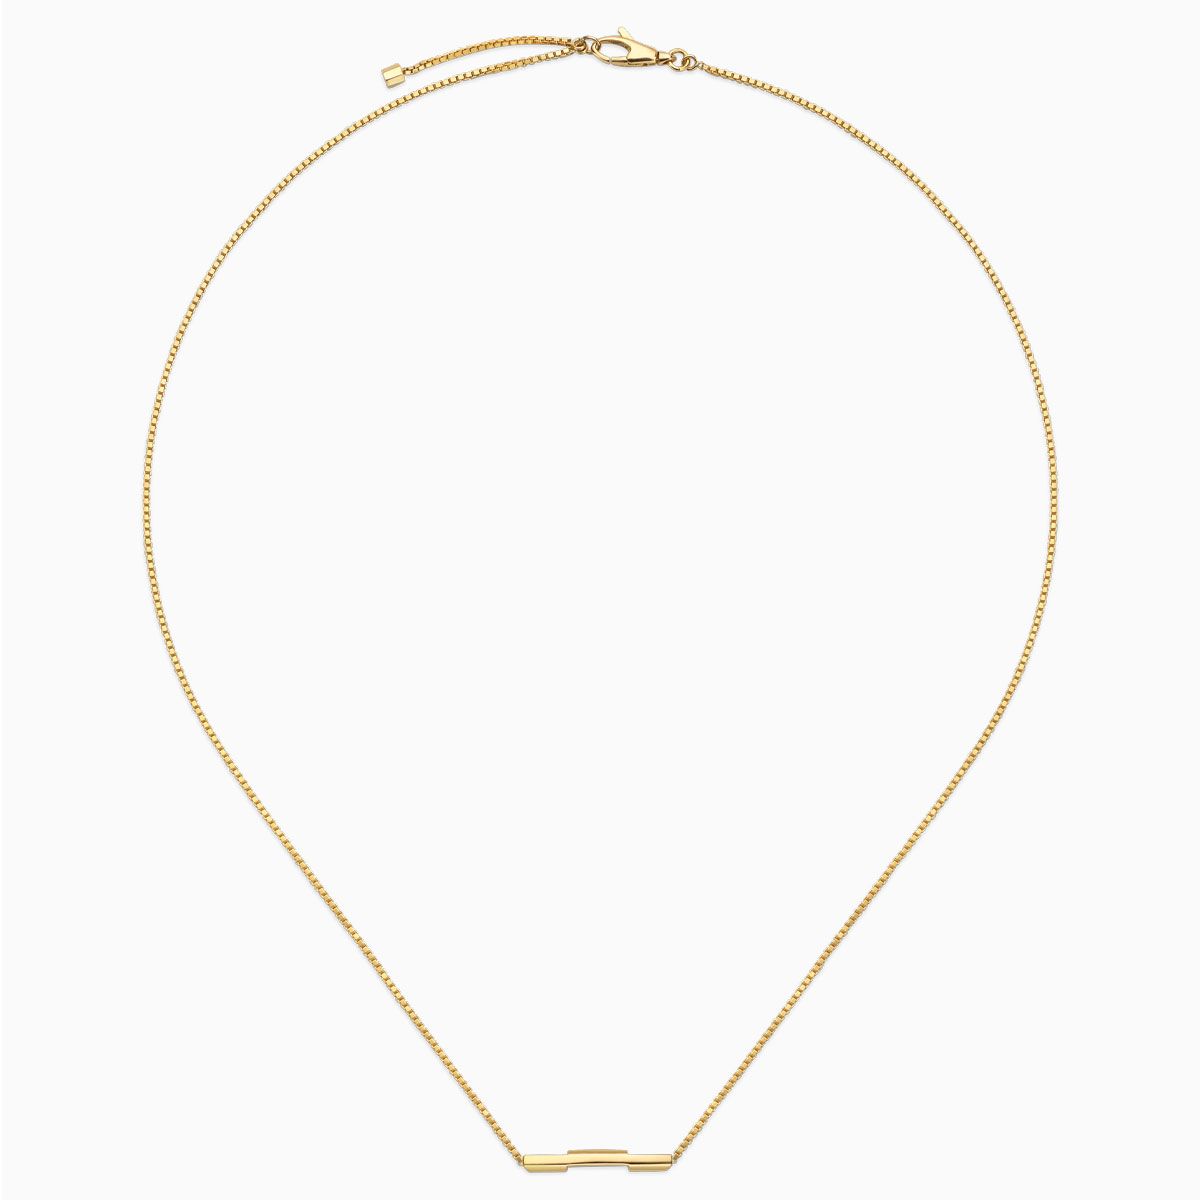 Necklace Gucci Link to Love yellow gold